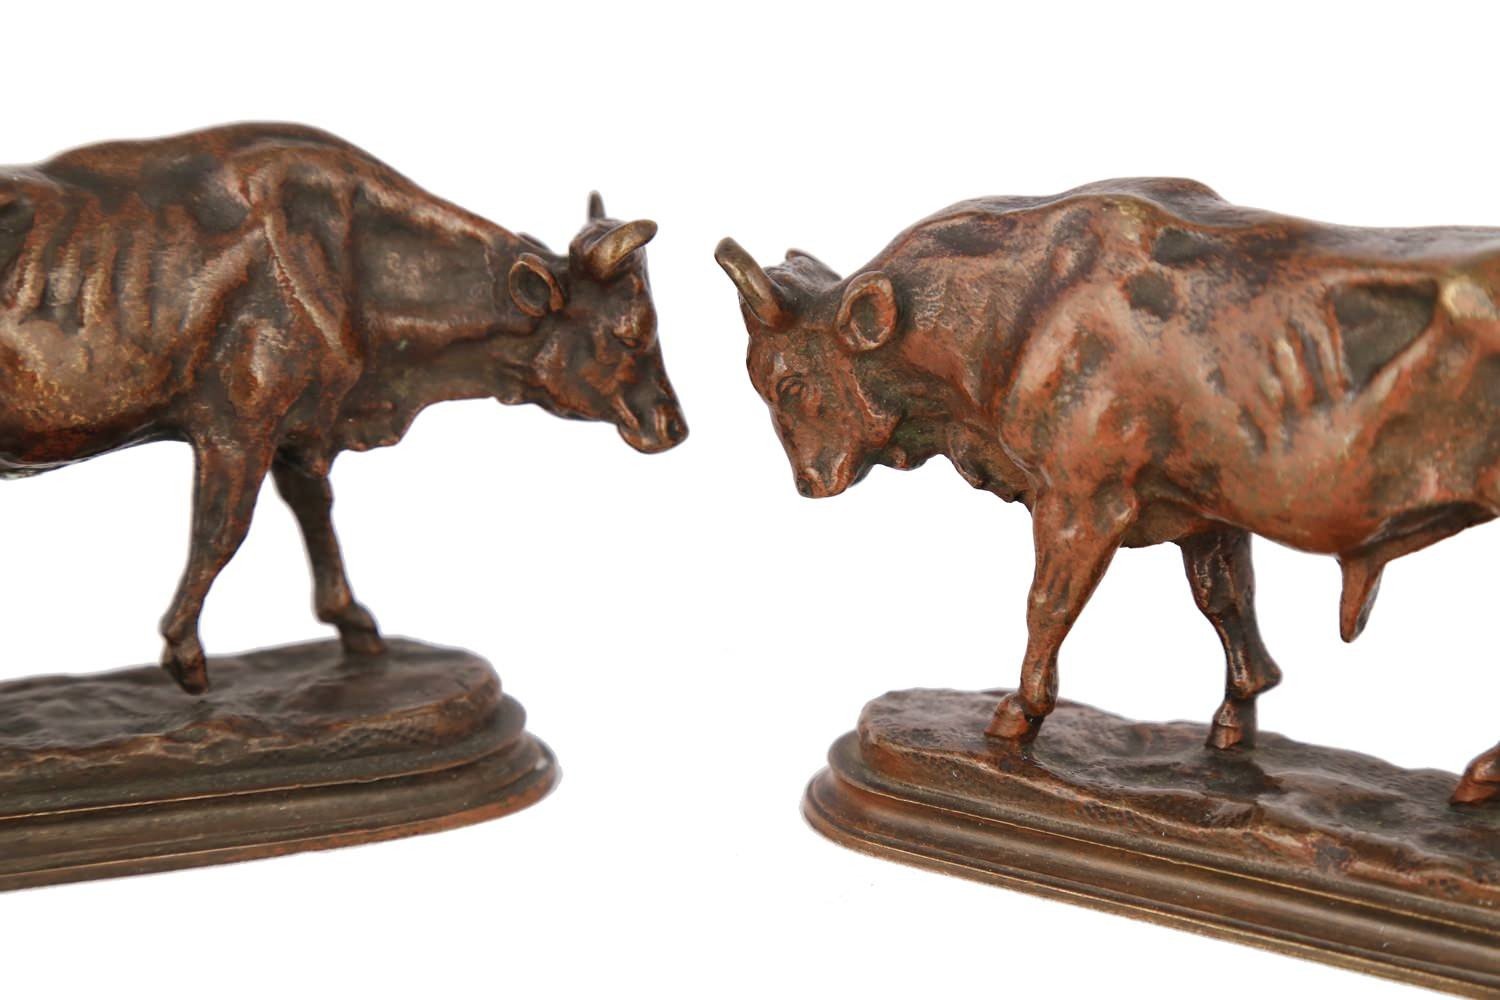 Pair of Bronze Sculptures, Bull and Cow by Auguste Caïn